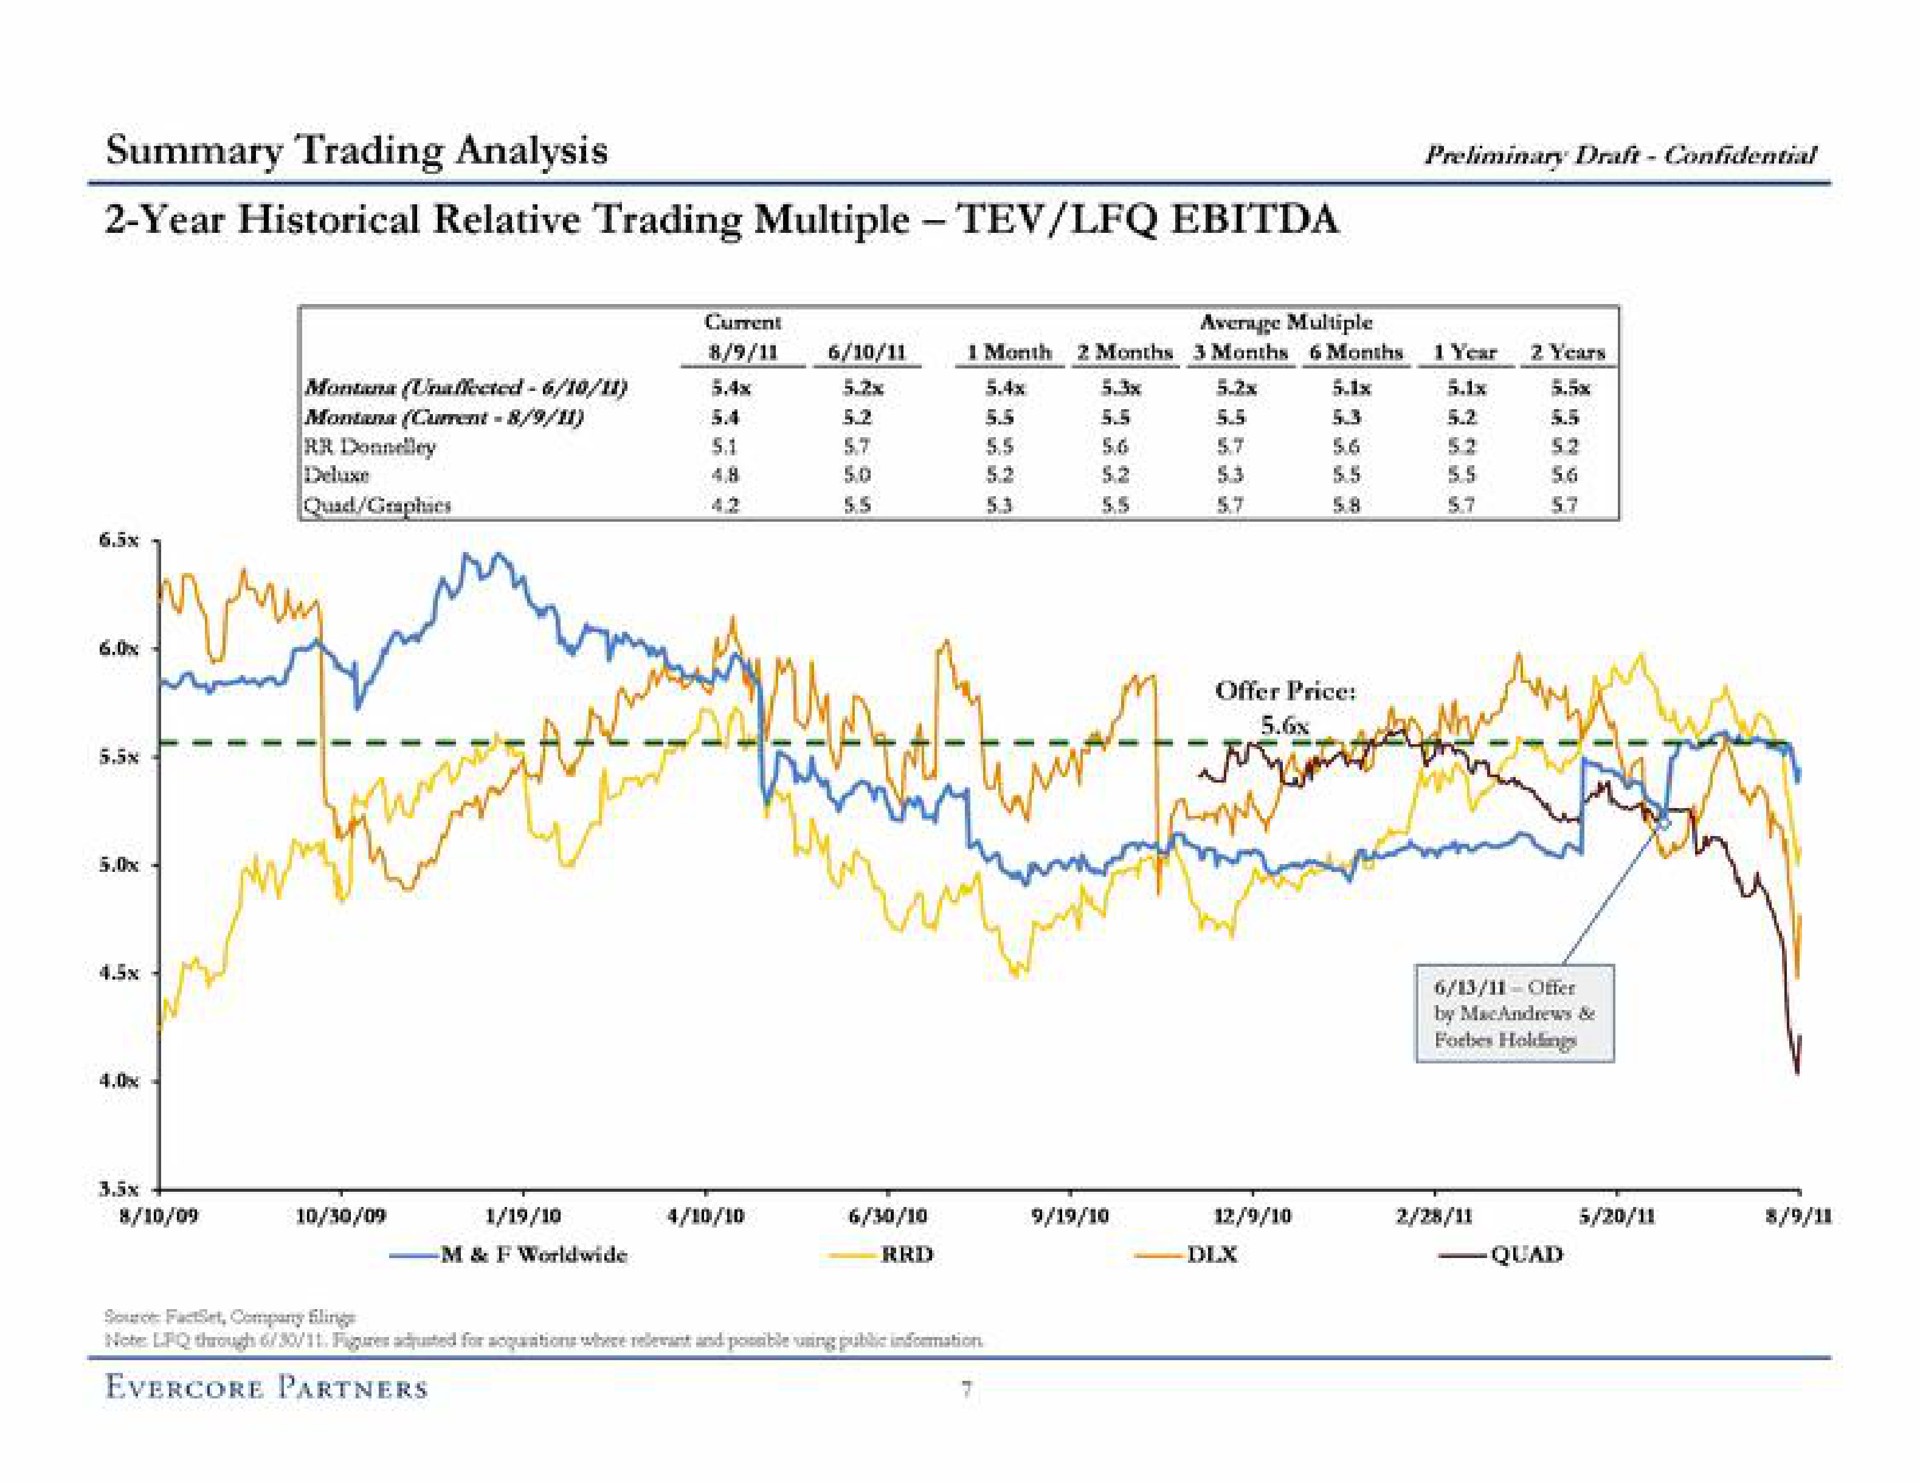 summary trading analysis preliminary draft confidential year historical relative trading multiple | Evercore